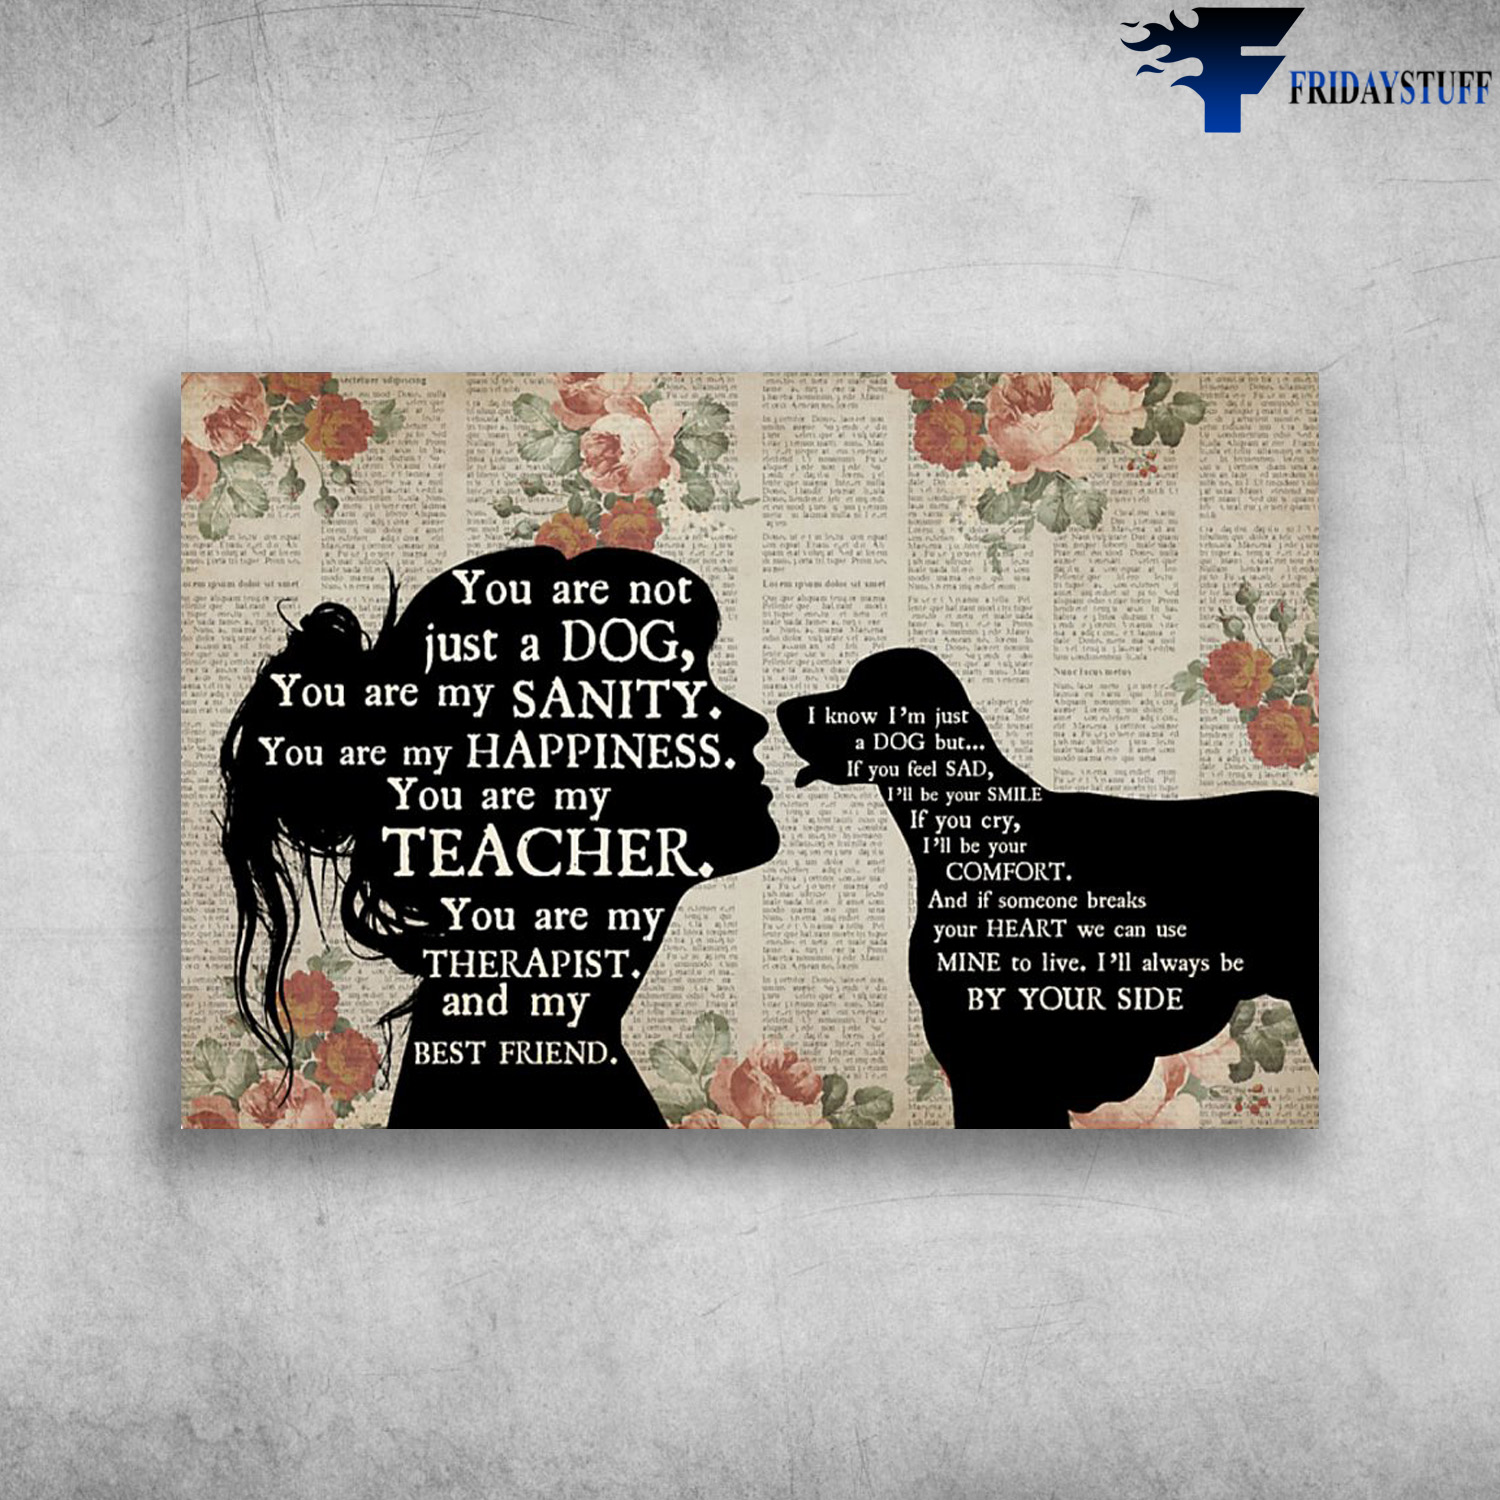 Girl Loves English Setter – You Are Not Just A Dog, You Are My Sanity, You Are My Happiness, You Are My Teacher, You Are My Therapist, And My Best Friend, I Know I’m Just A Dog But, If You Feel Sad